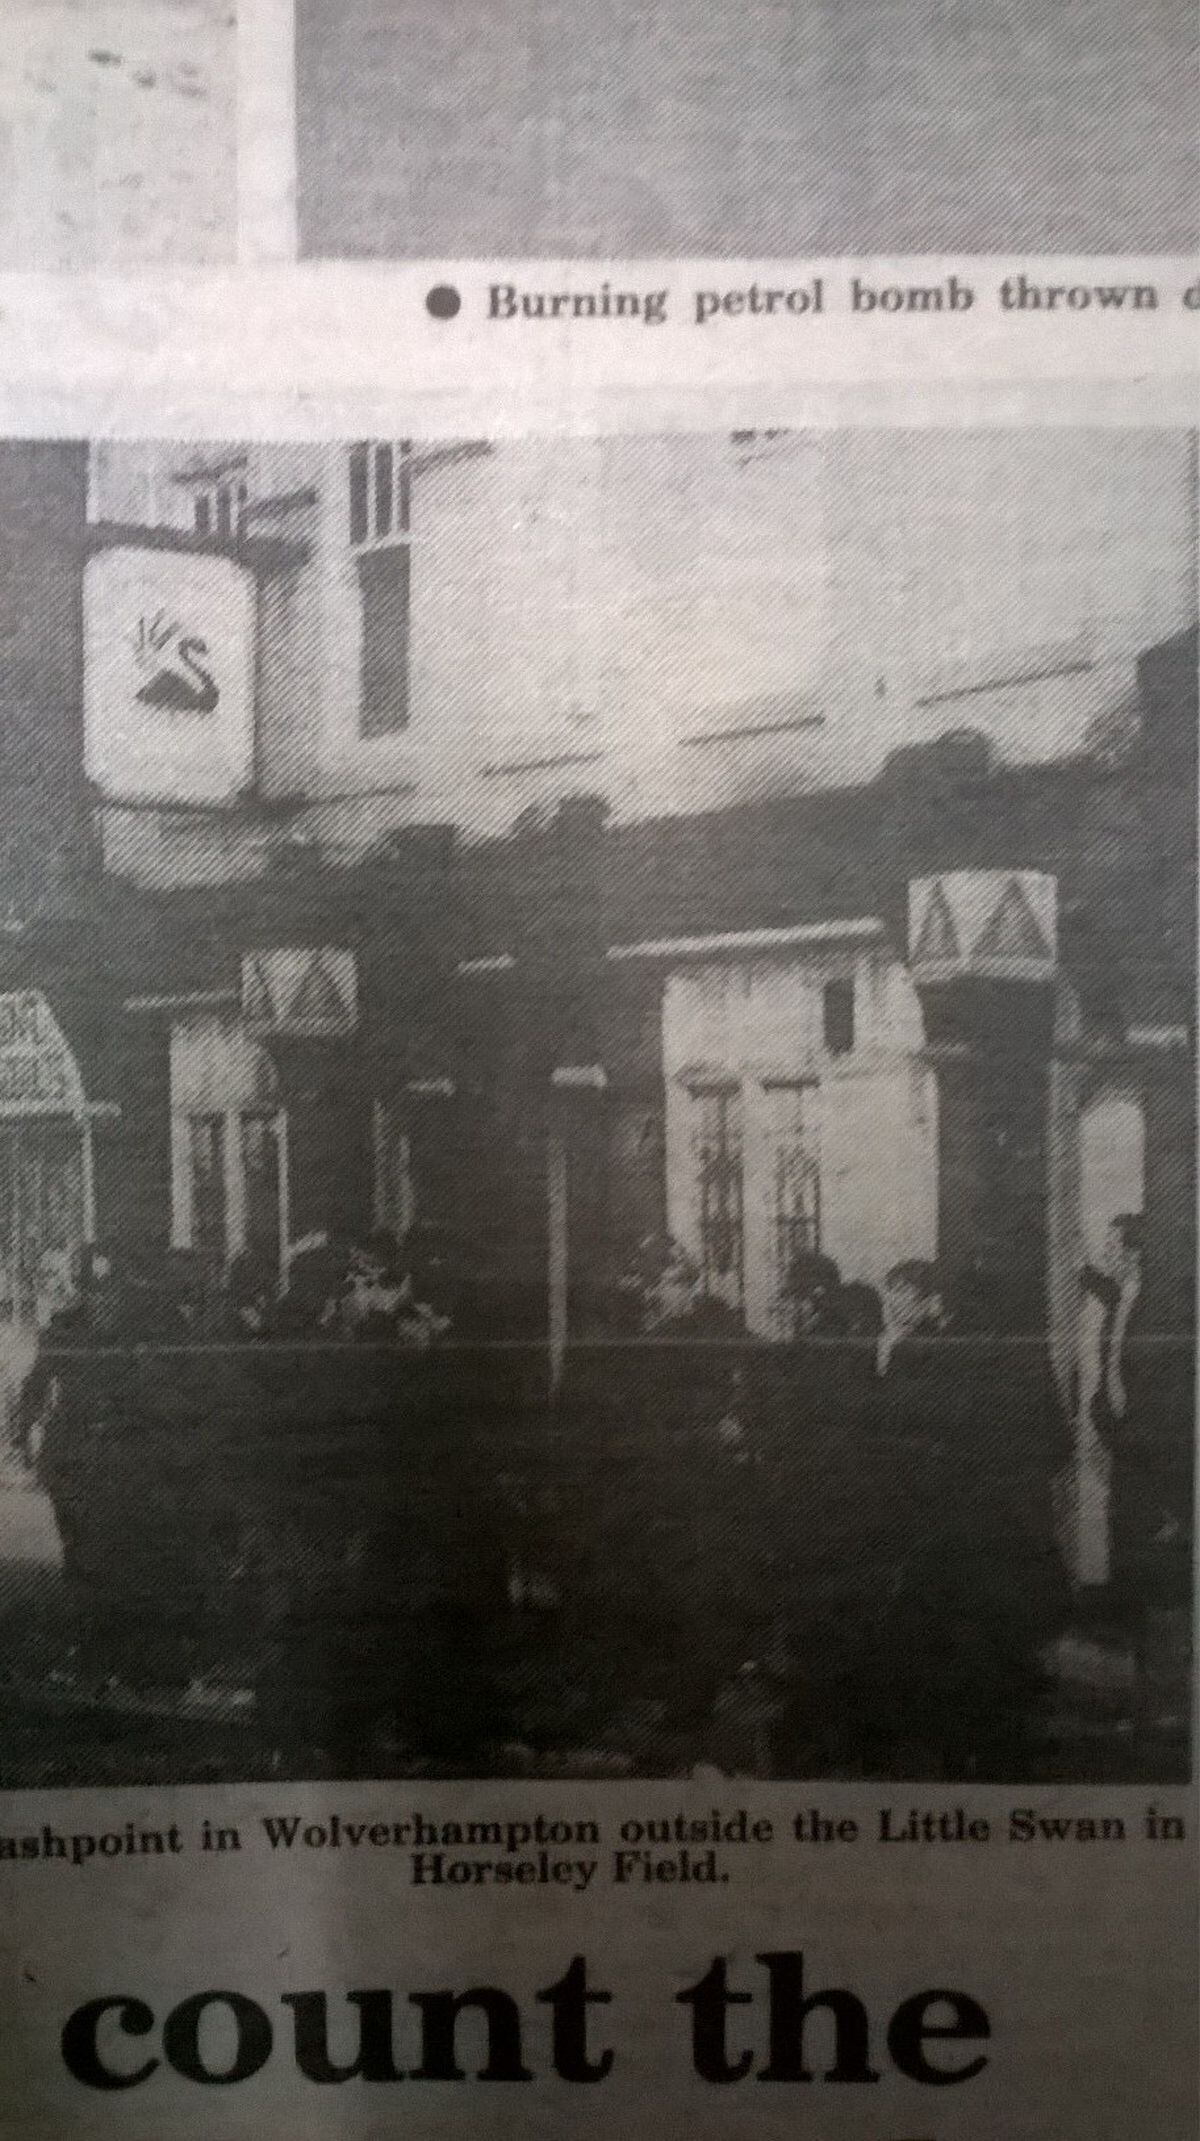 The Little Swan pub in Horseley Fields was another flashpoint in Wolverhampton